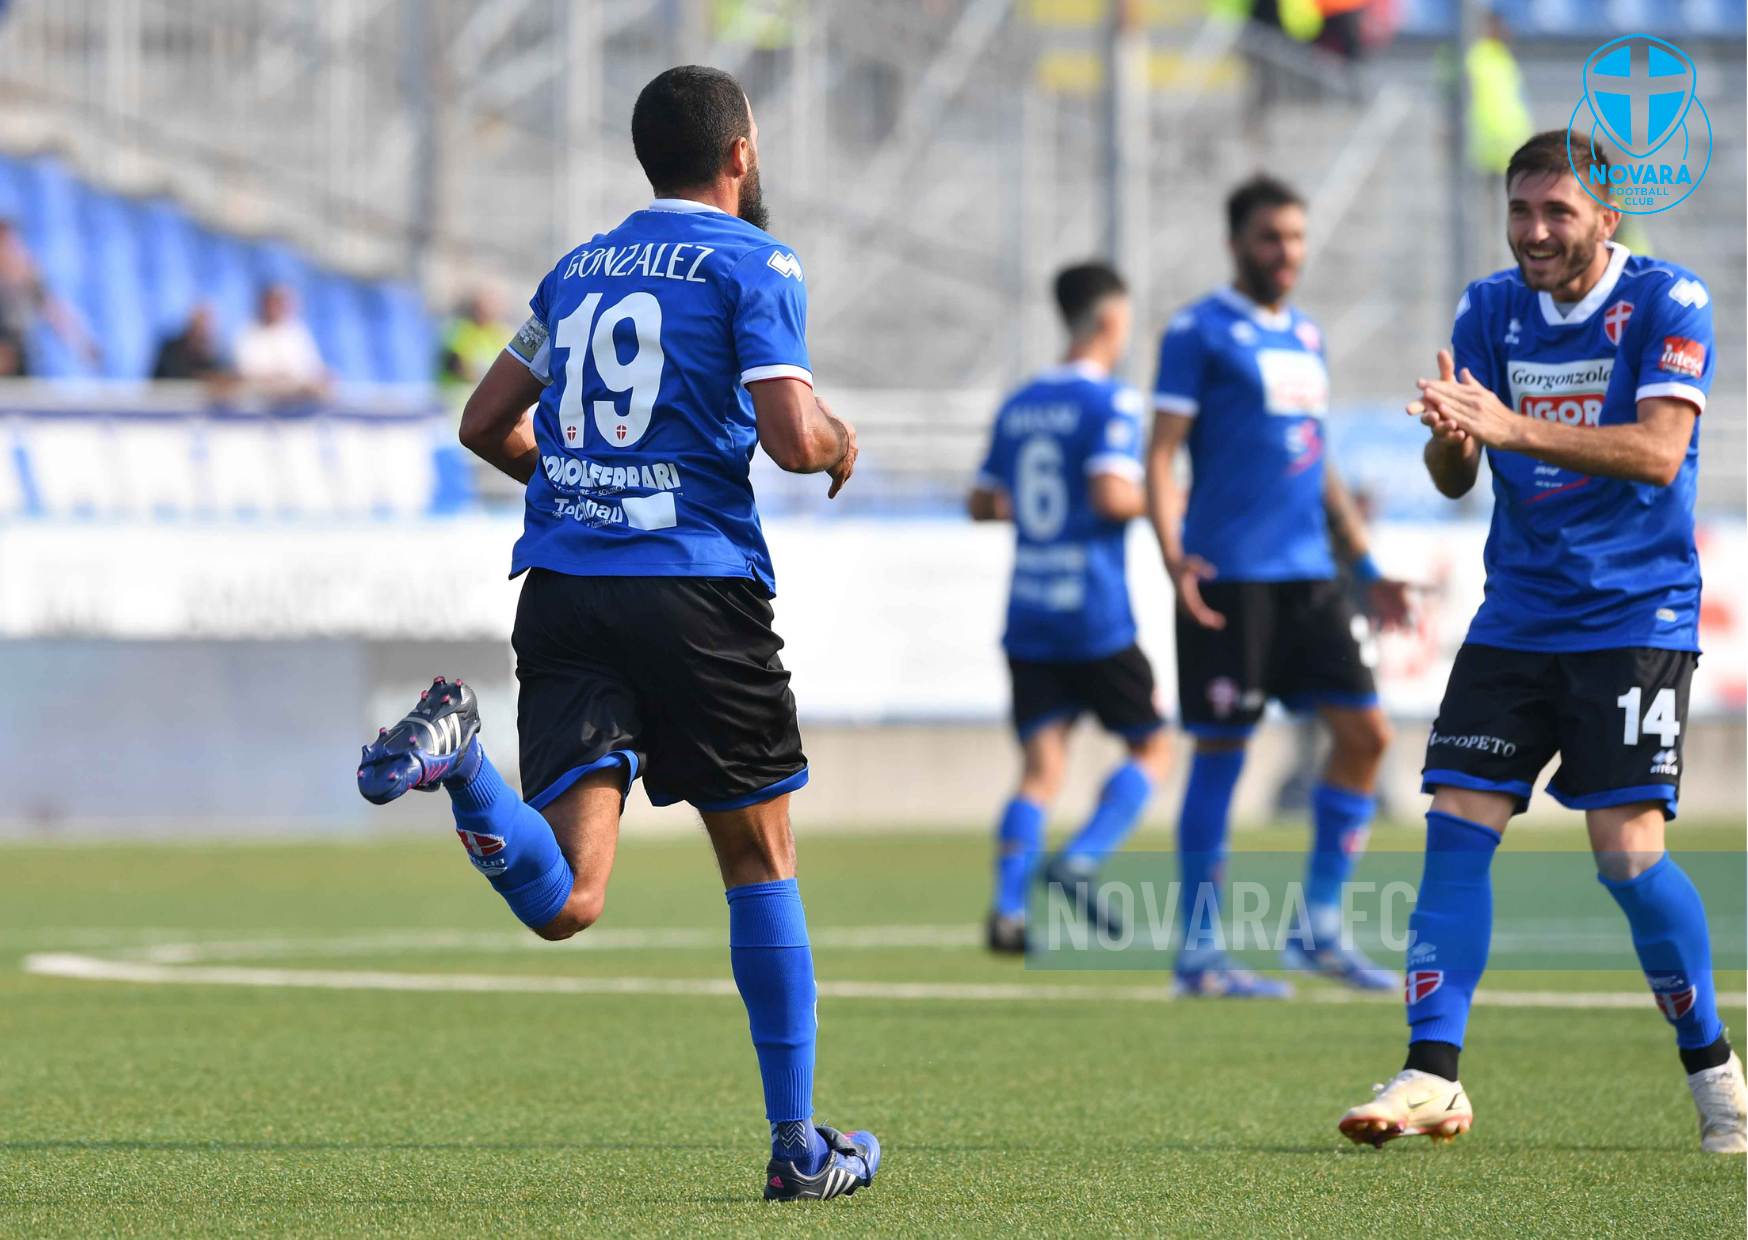 Read more about the article Novara-Lecco 1-2 | Gallery